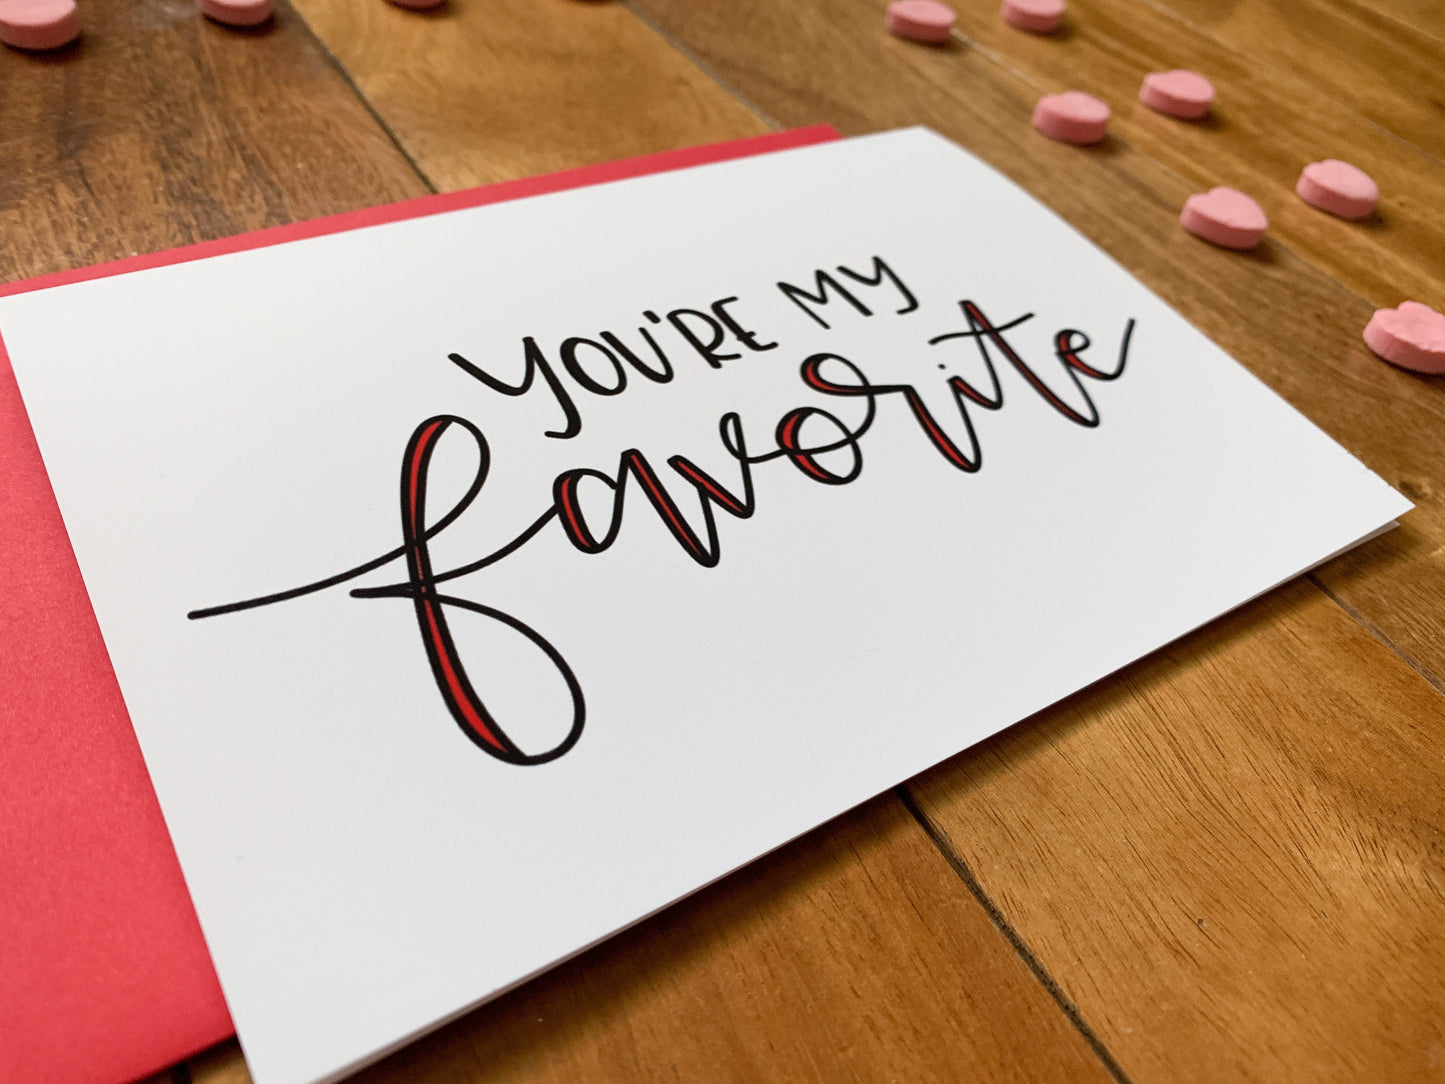 You're My Favorite Card by StoneDonut Design